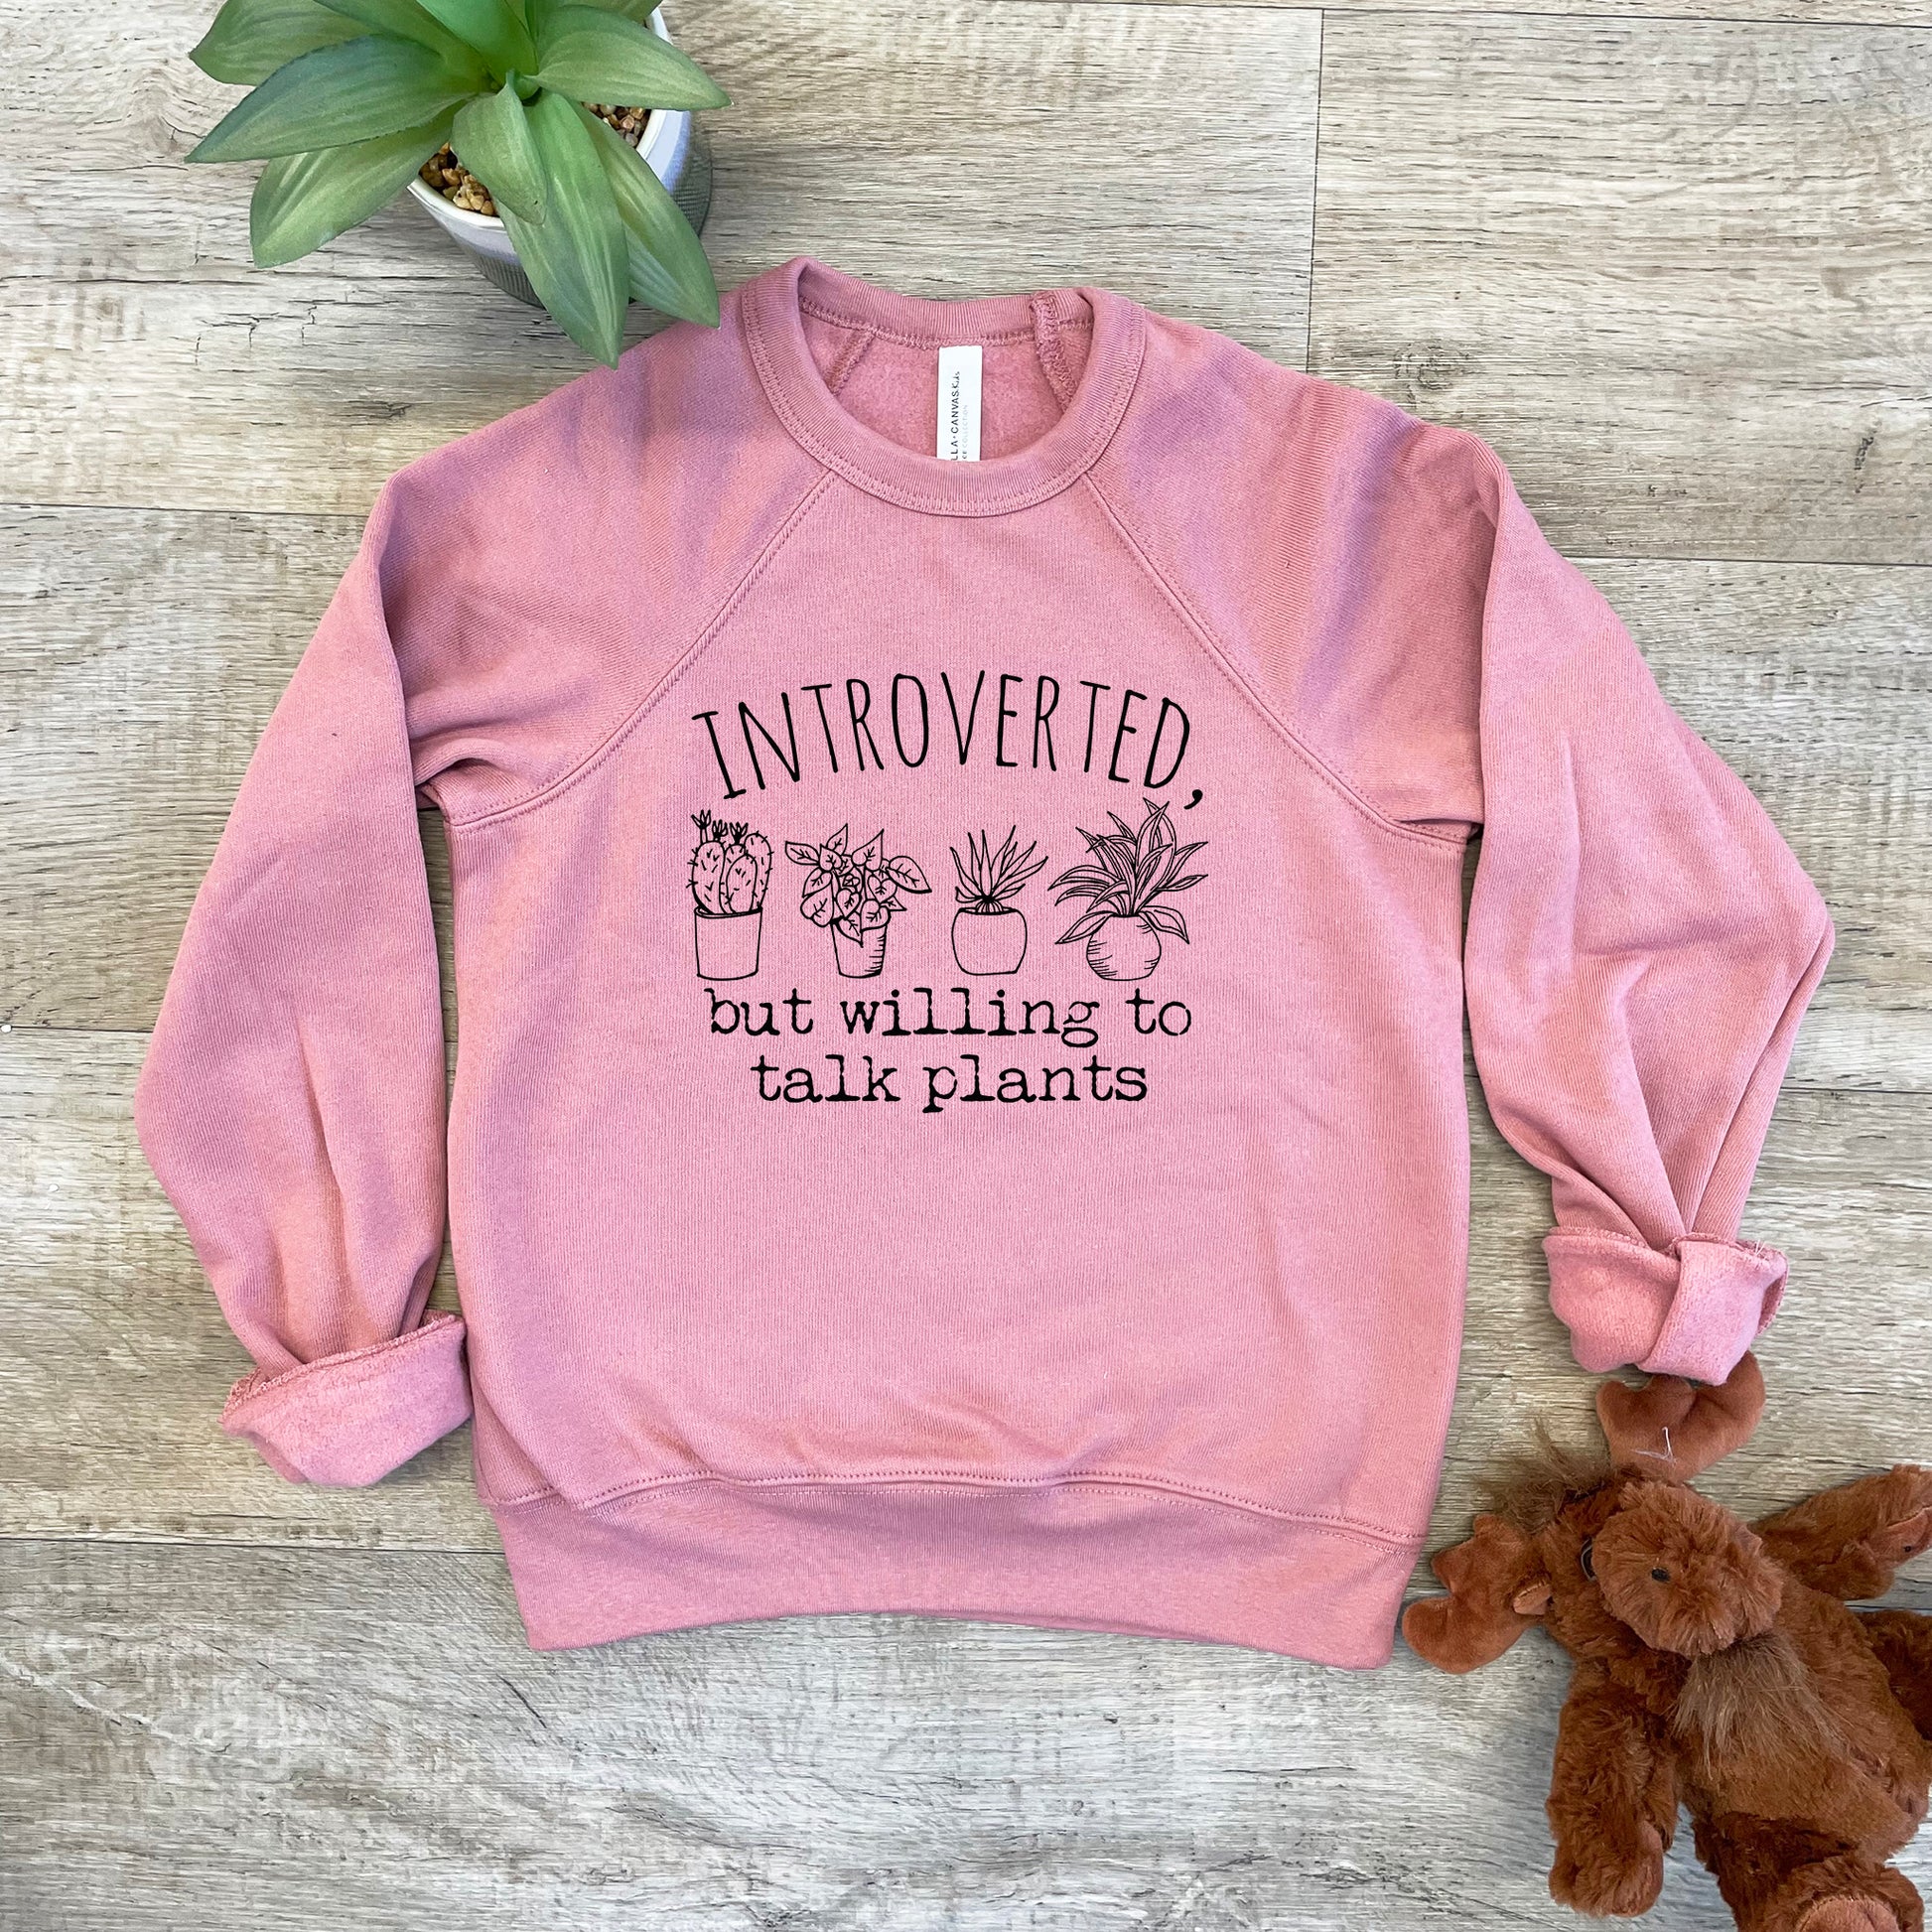 a pink sweatshirt with a plant on it next to a teddy bear